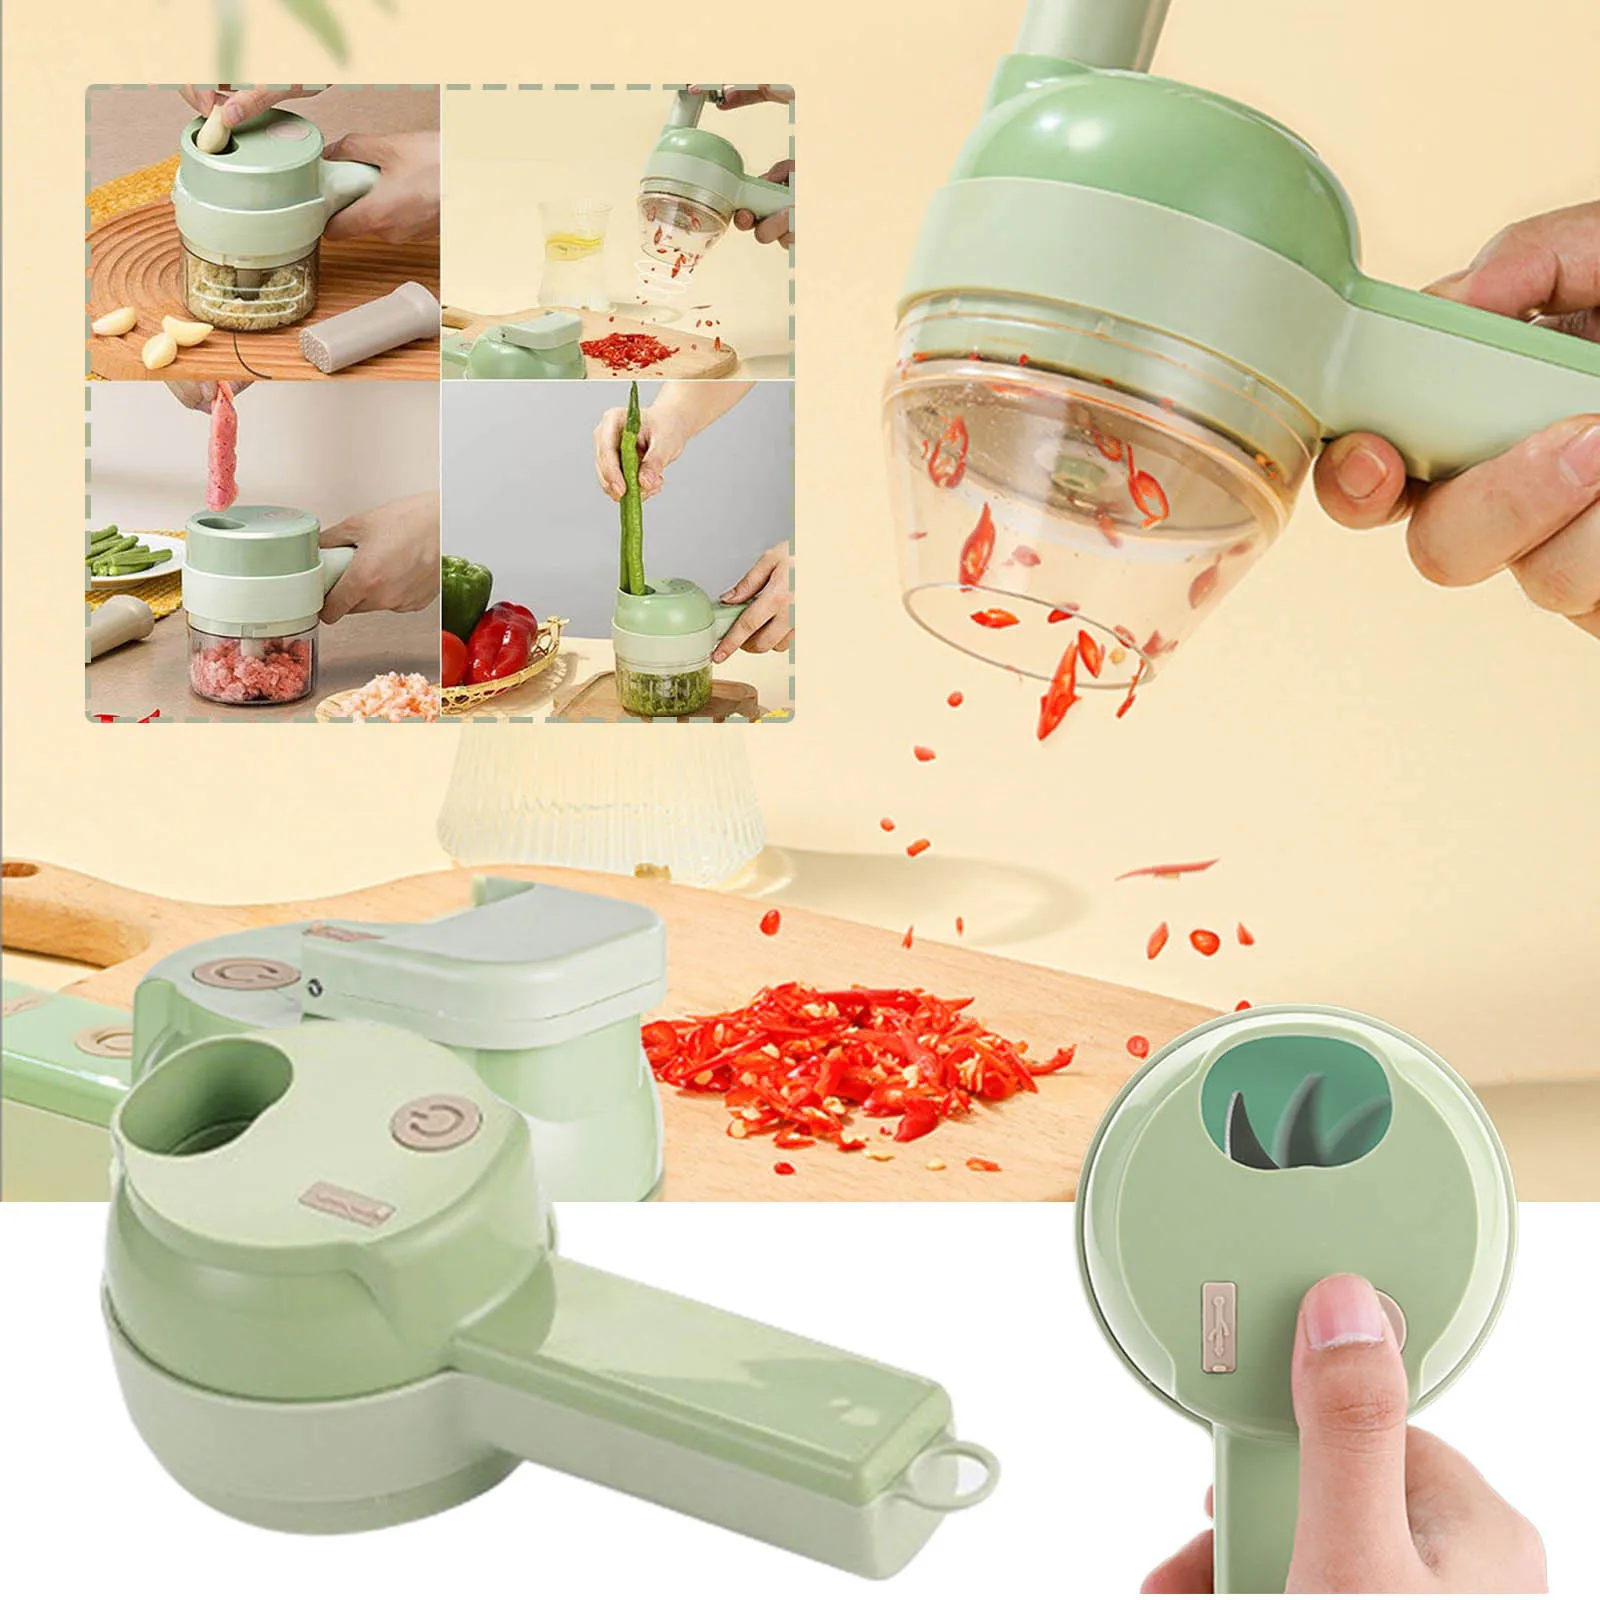 https://ae01.alicdn.com/kf/S00c097676bae4059b9d5fb750245be8br/Electric-Vegetable-Cutter-Kitchen-Set-4-In-1-Portable-Rechargeable-Wireless-Food-Processor-For-Pepper-Garlic.jpg